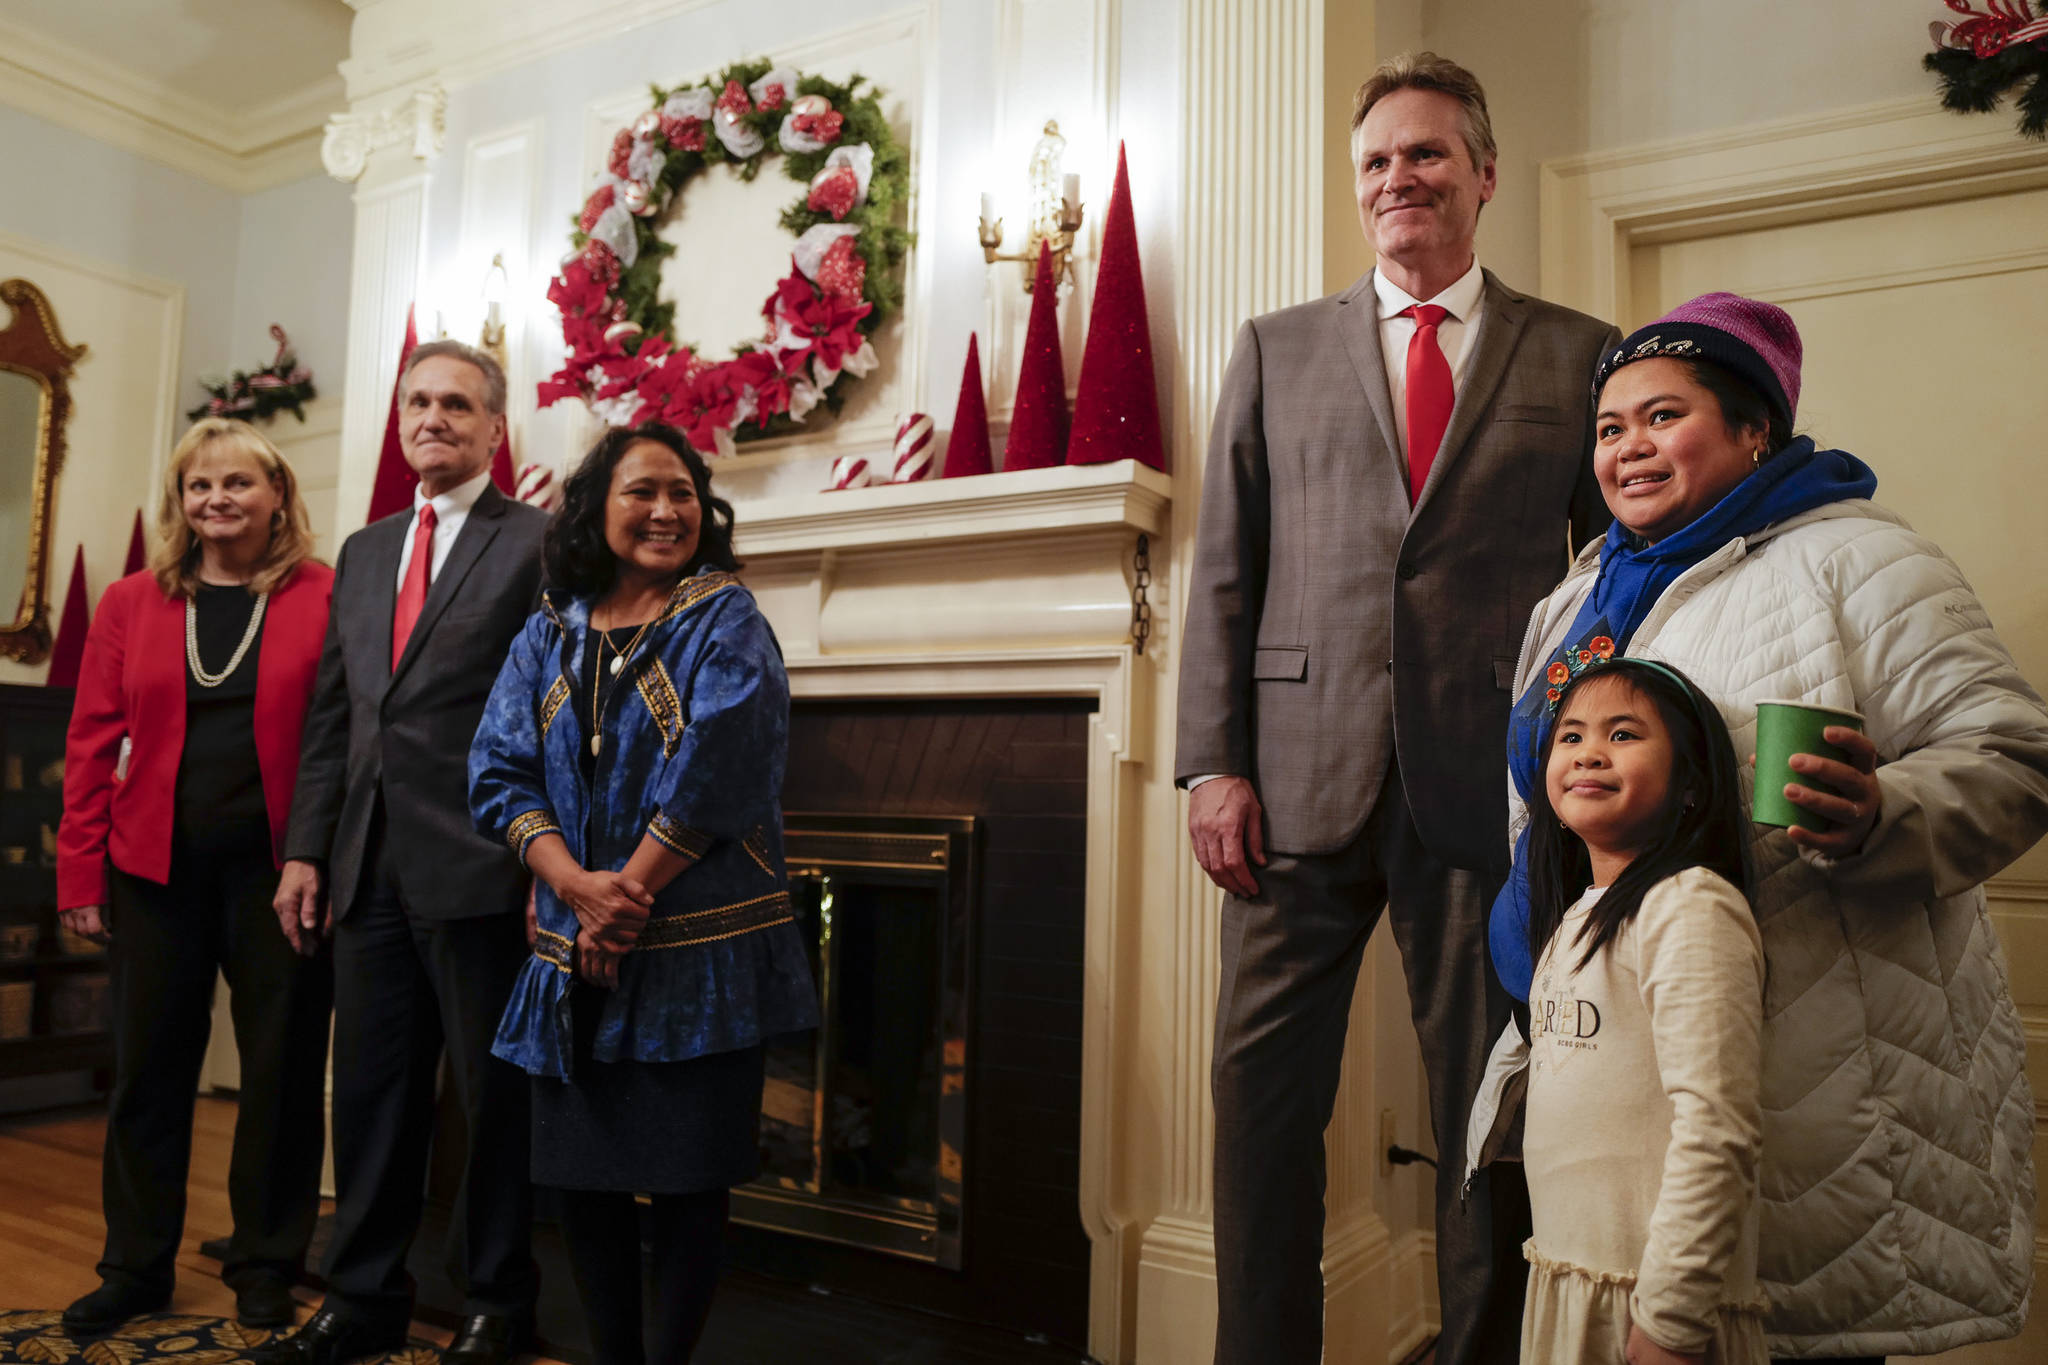 Gov. Mike Dunleavy, R-Alaska, poses for a picture with Marnellie Remeualt and her daughter, Mara, 5, as Gov. Dunleavy’s wife, Rose, Lt. Gov. Kevin Meyer and his wife, Marti, look on at the Governor’s Open House on Tuesday, Dec. 10, 2019. (Michael Penn | Juneau Empire)